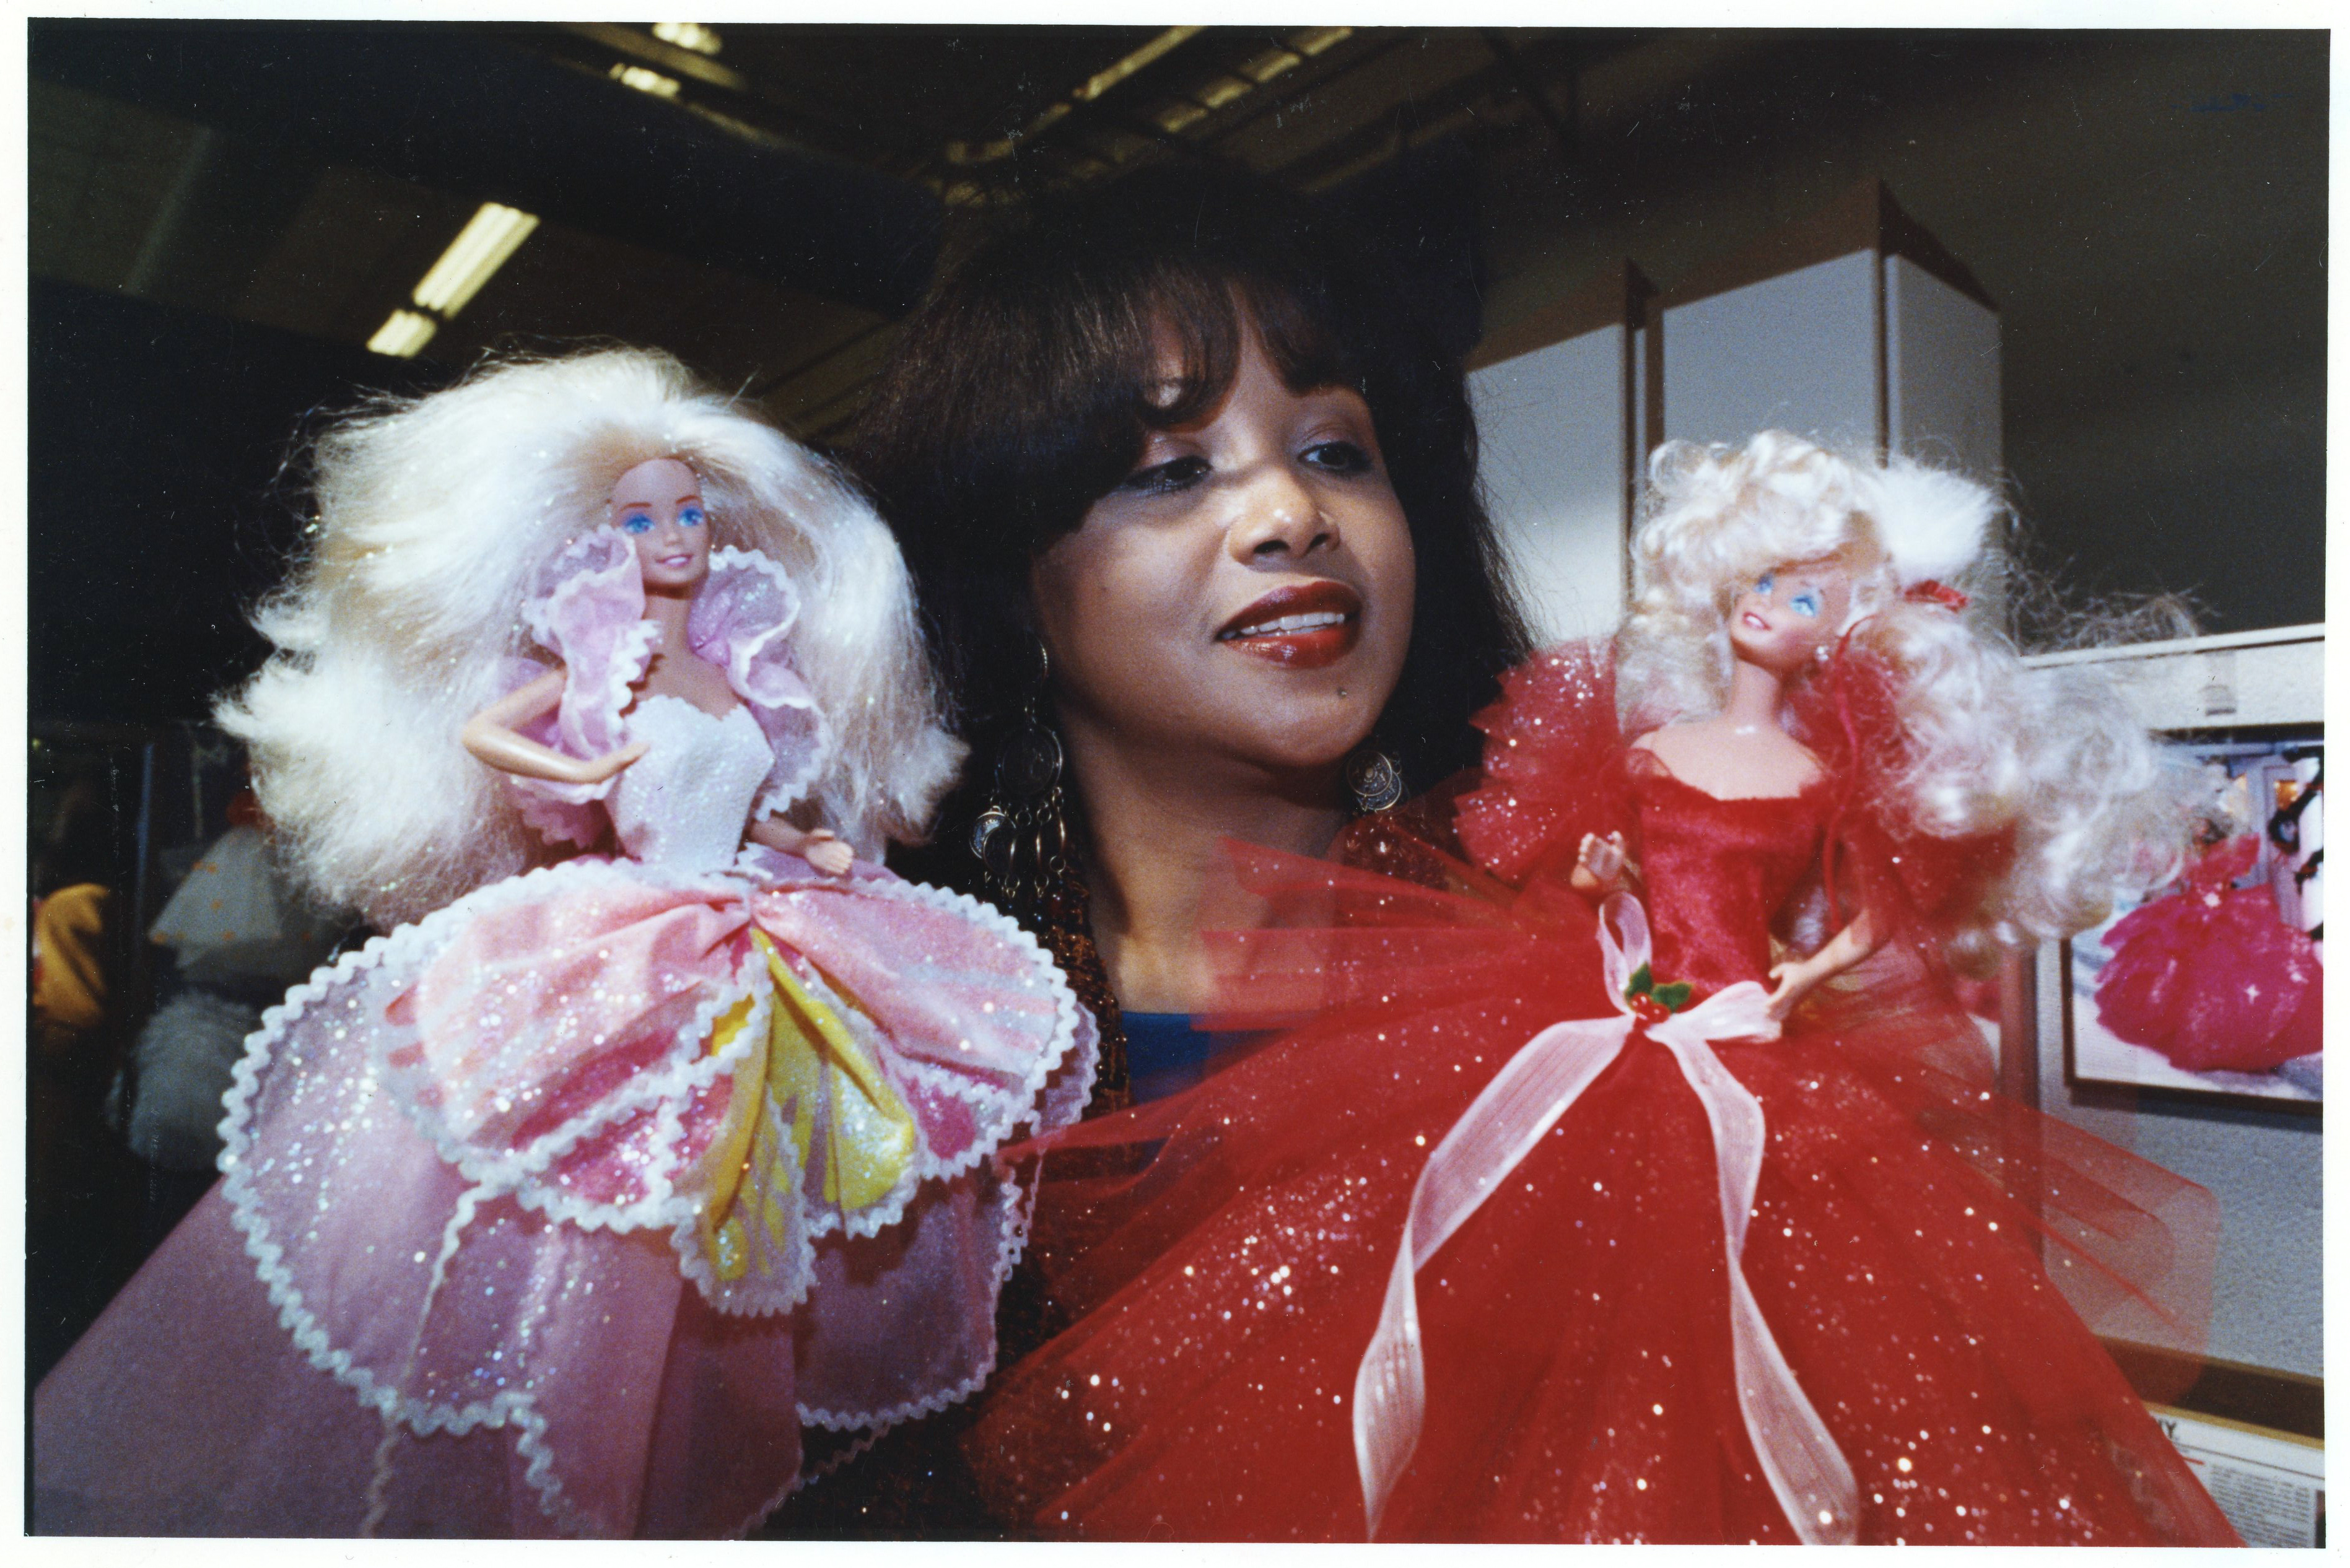 Louvenia 'Kitty' Black Perkins shows off two of her shimmering creations for Barbie dolls at the Mattel offices in El Segundo, California, on January 29, 1991